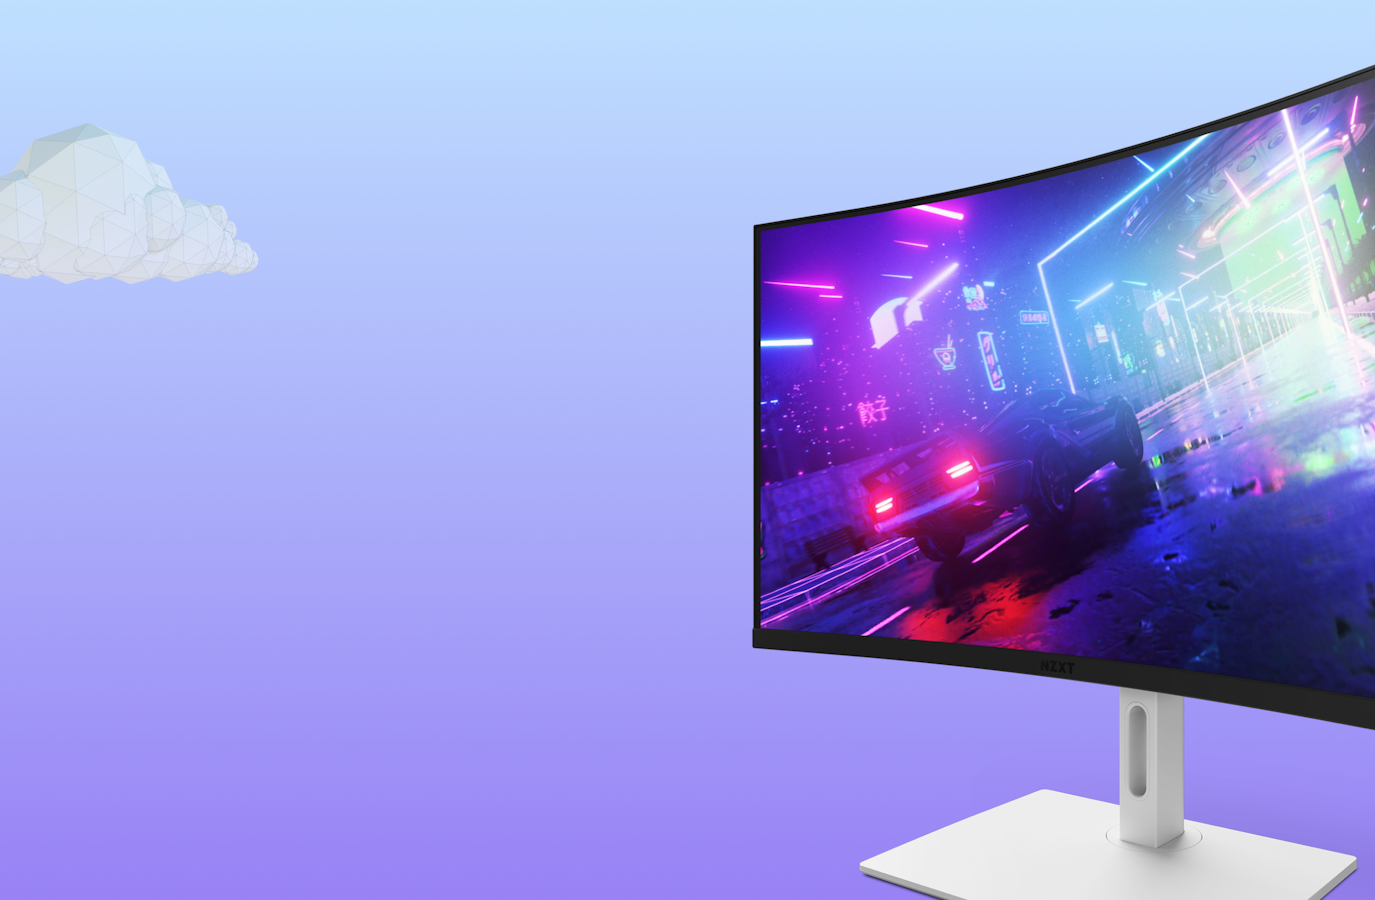 Canvas QHD Monitor with Purple Gradient Background